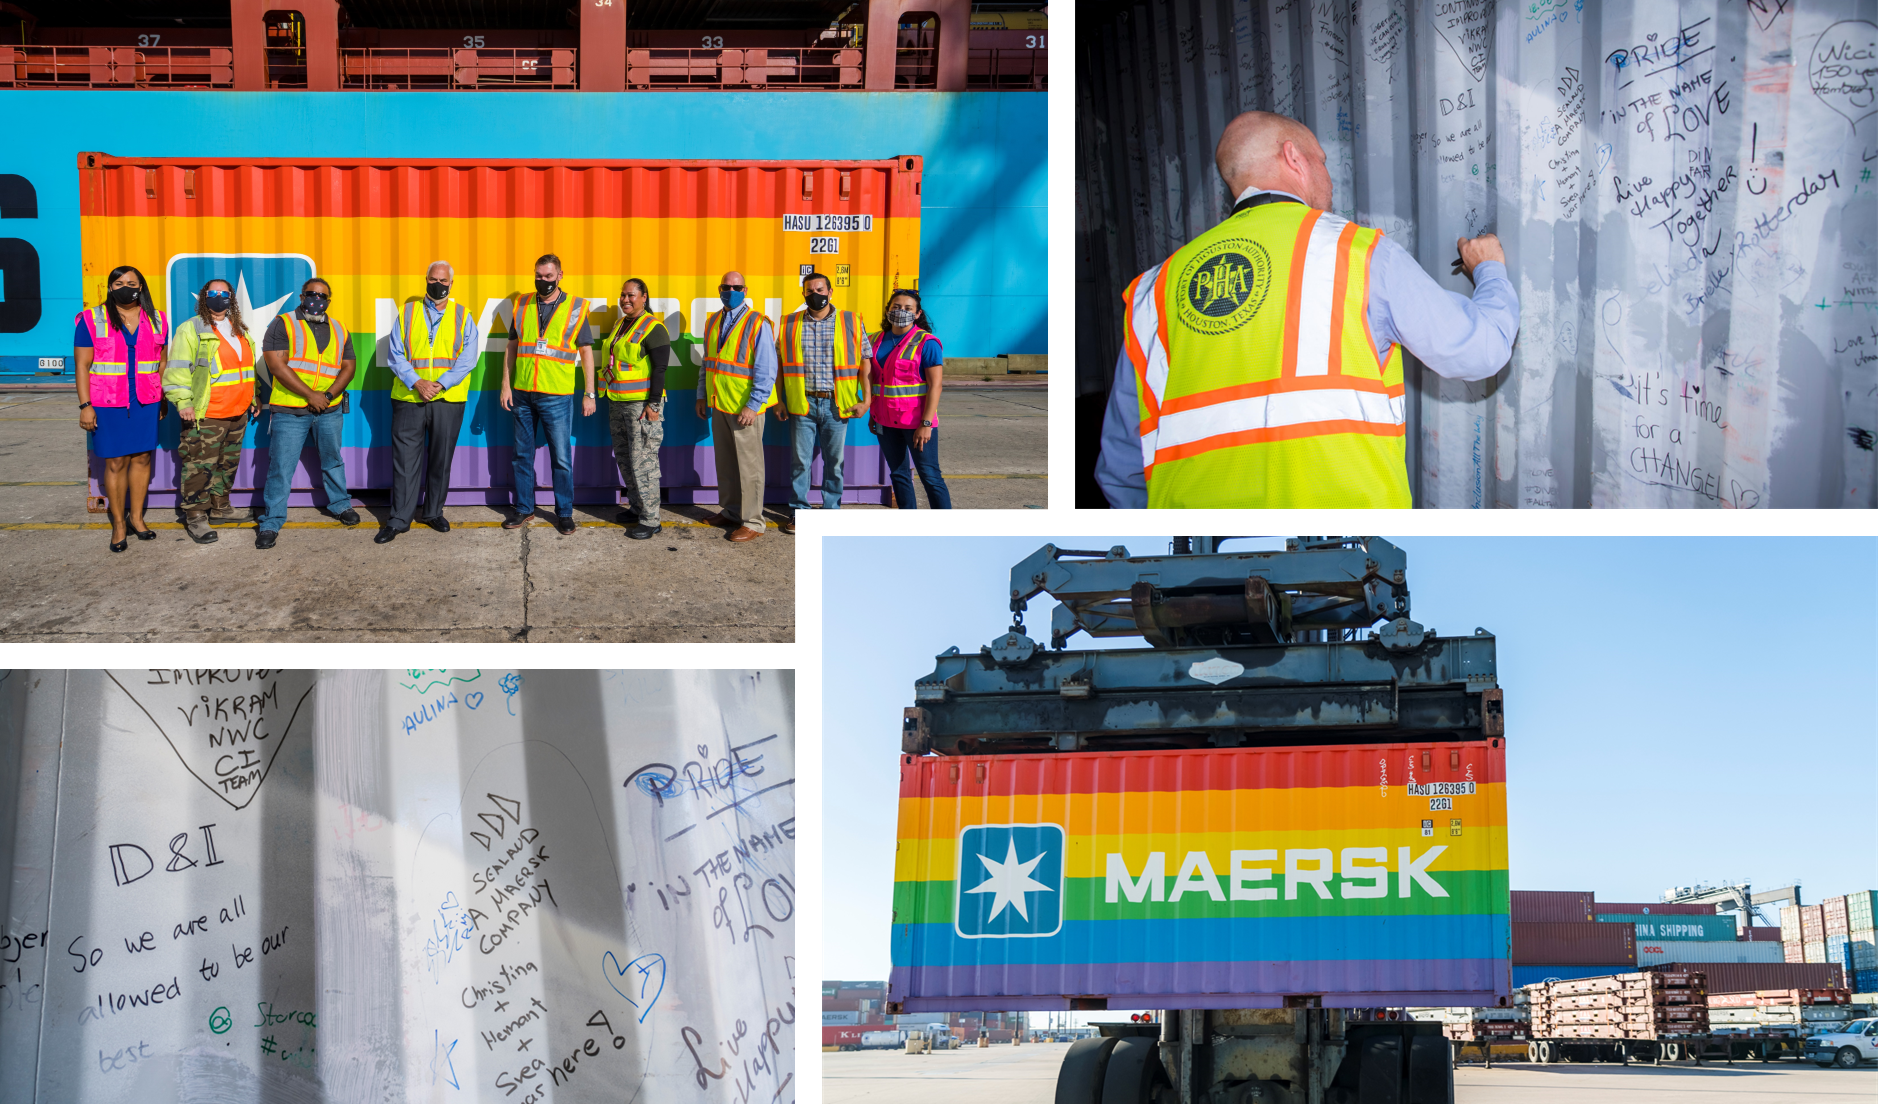 Maersk container photo collage